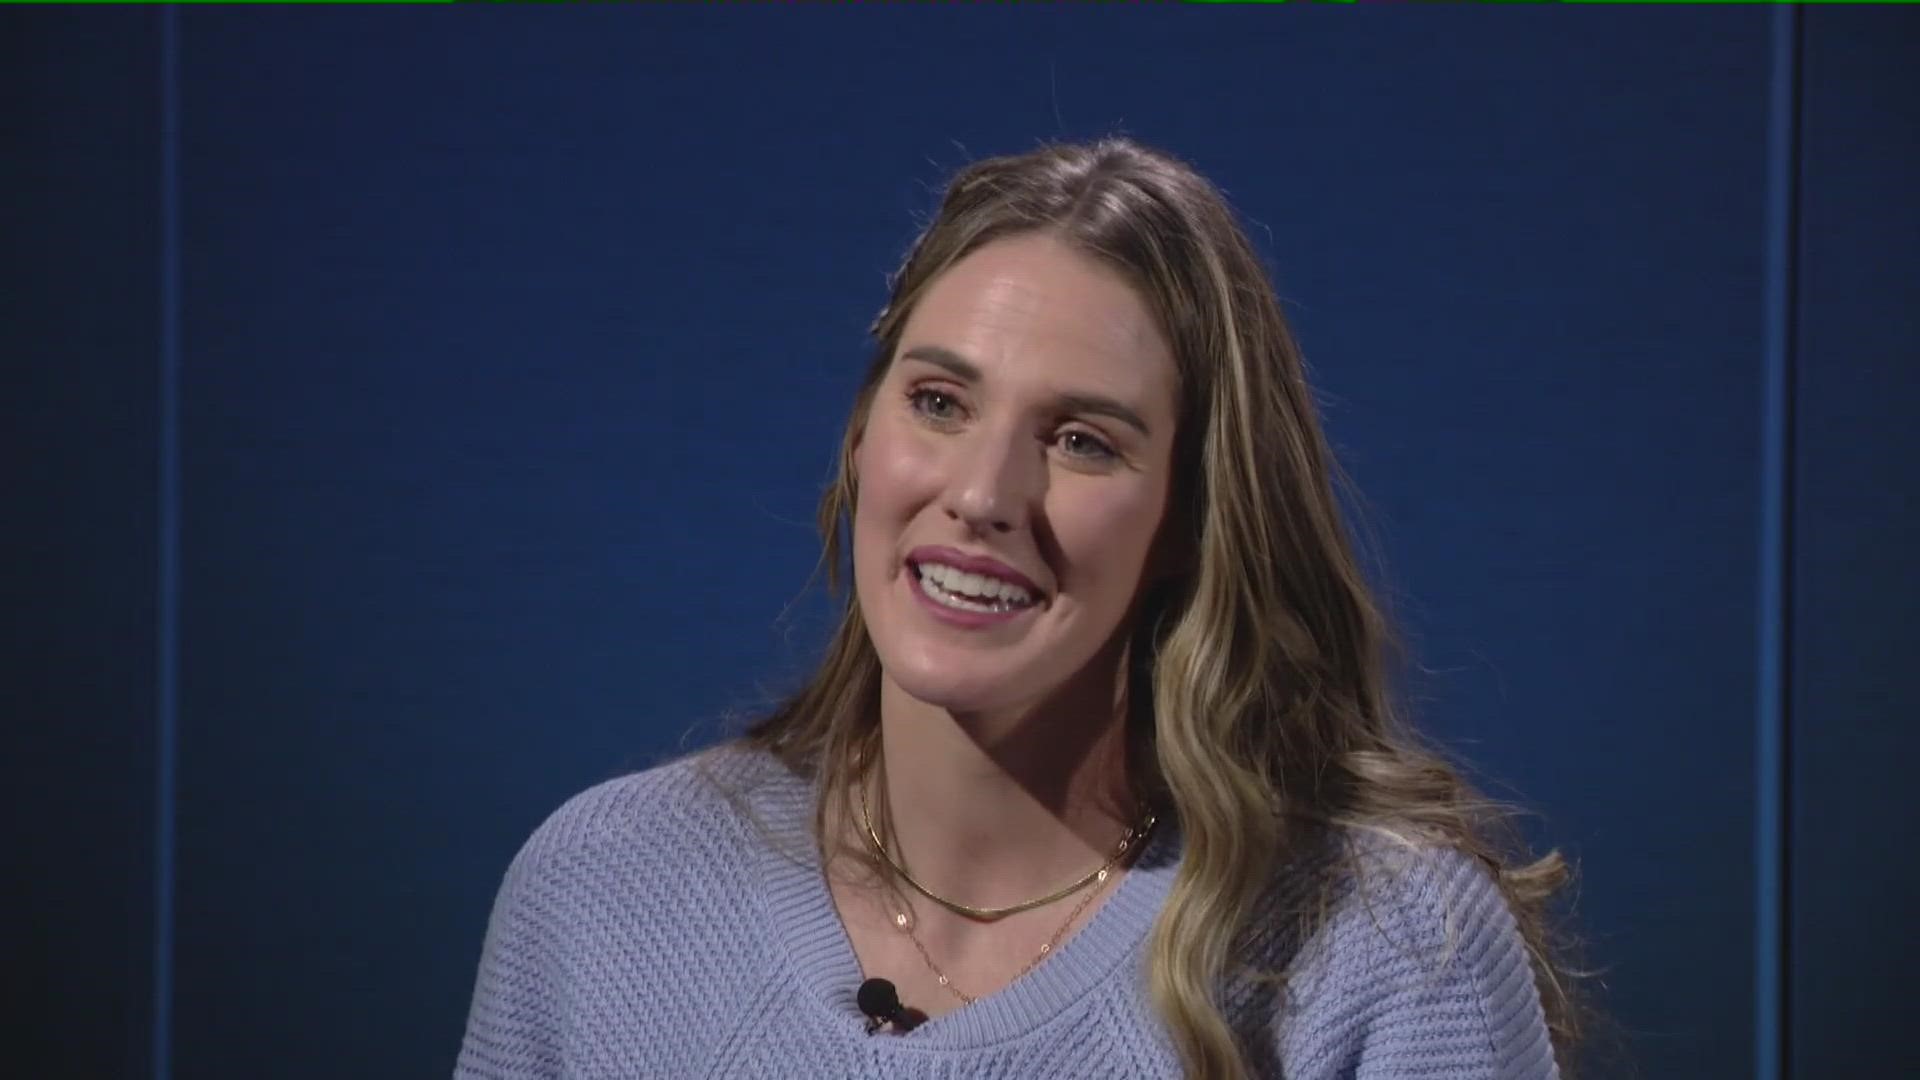 Missy Franklin talks about honoring family.